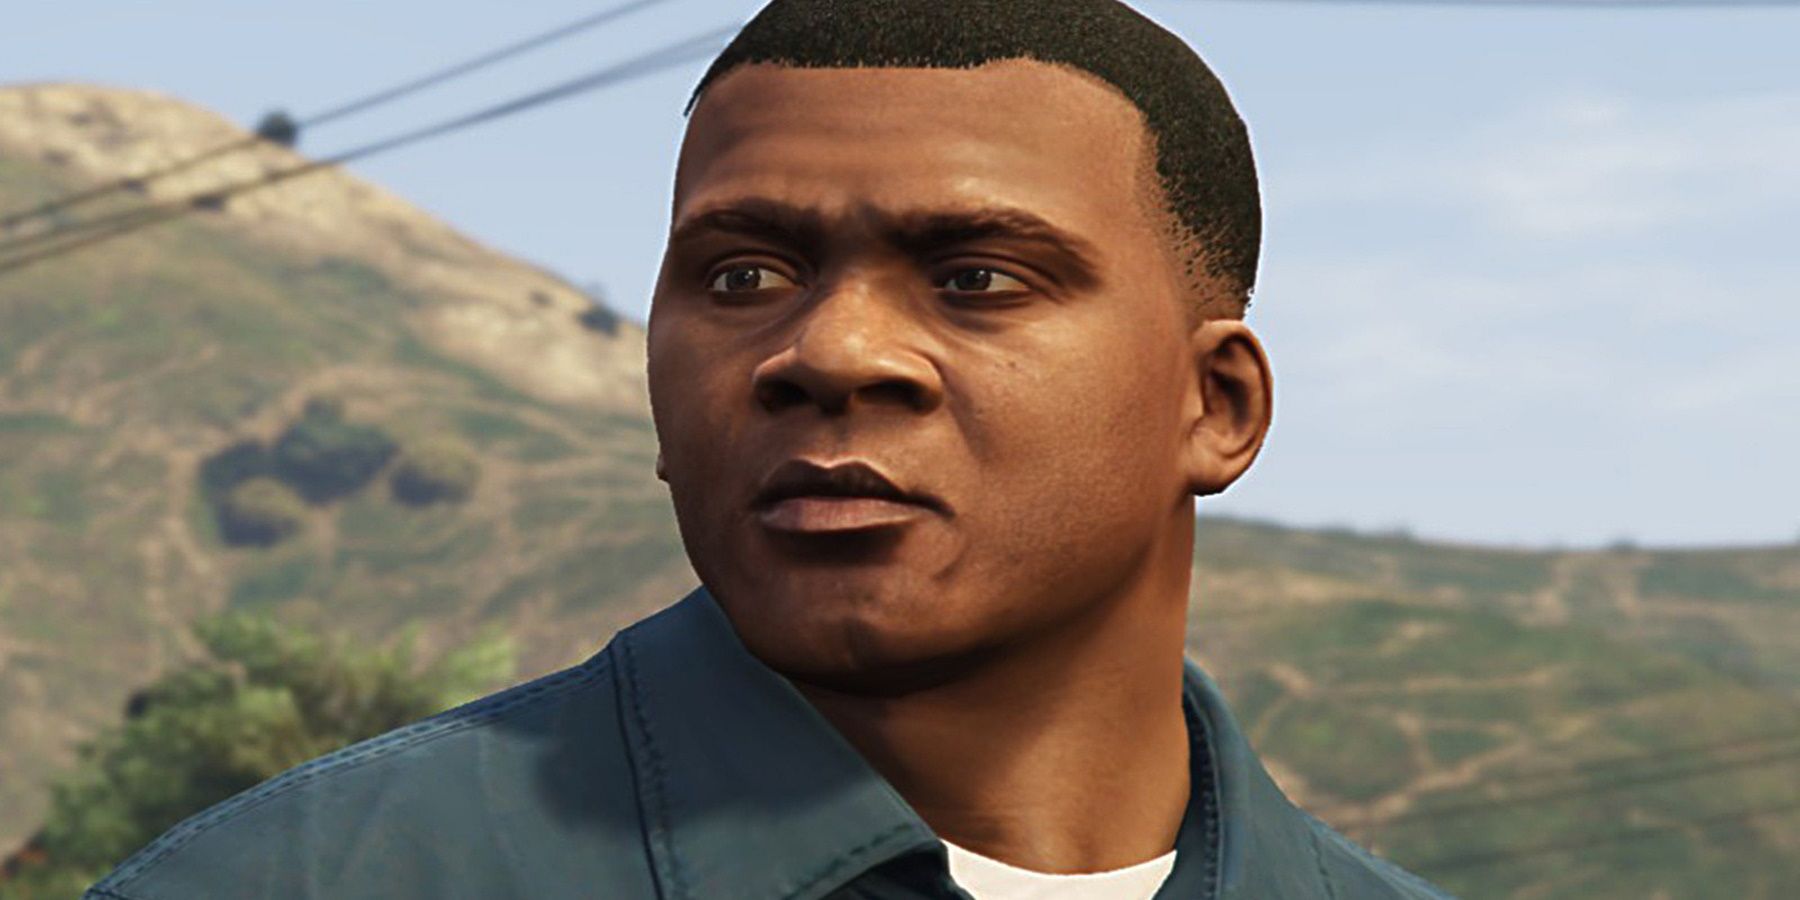 Franklin's Evolution From Grand Theft Auto 5 to GTA Online